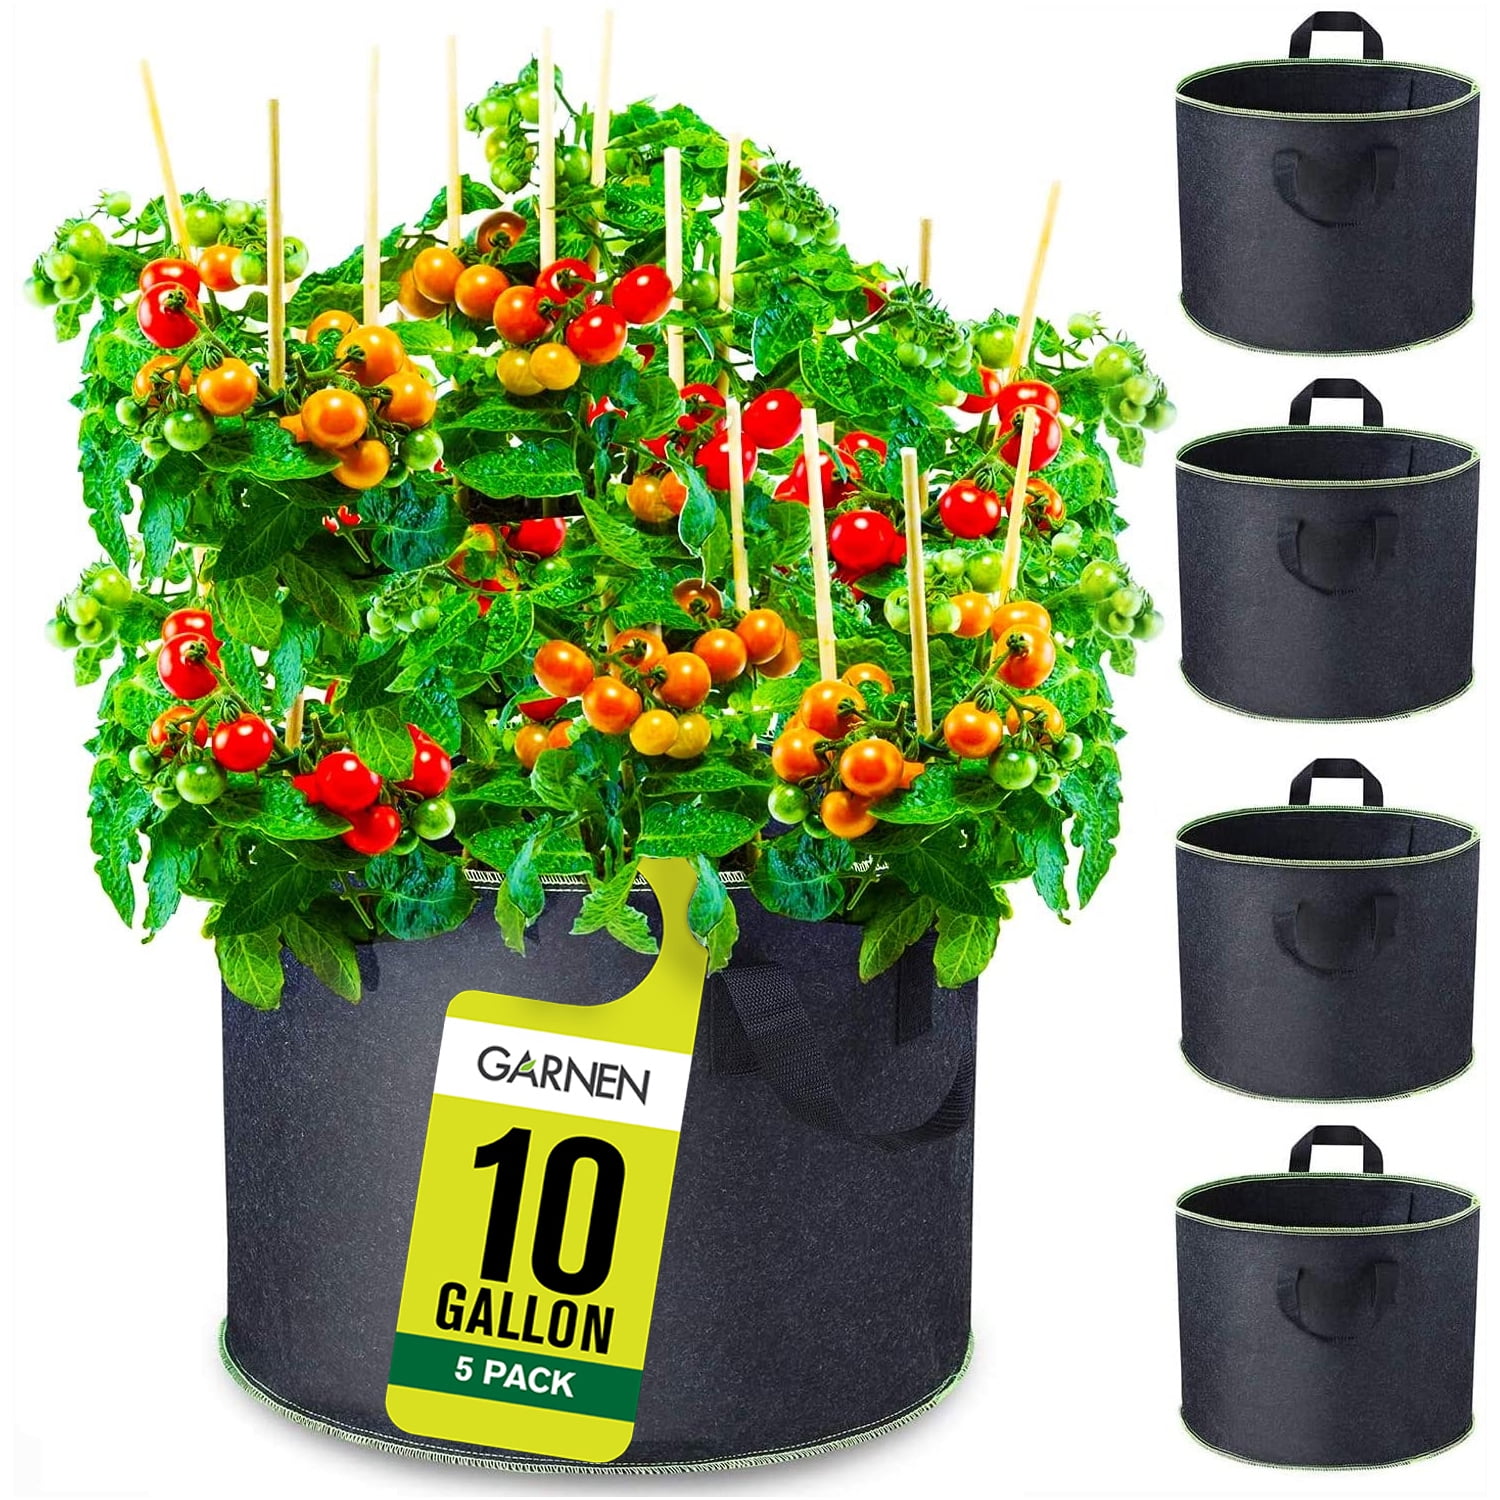 Nonwoven Fabric Pots with Handles Grow Pots Used for Planting Plants Flowers and Vegetables Grow Bags Deep 10 Gallon Smart Pots 